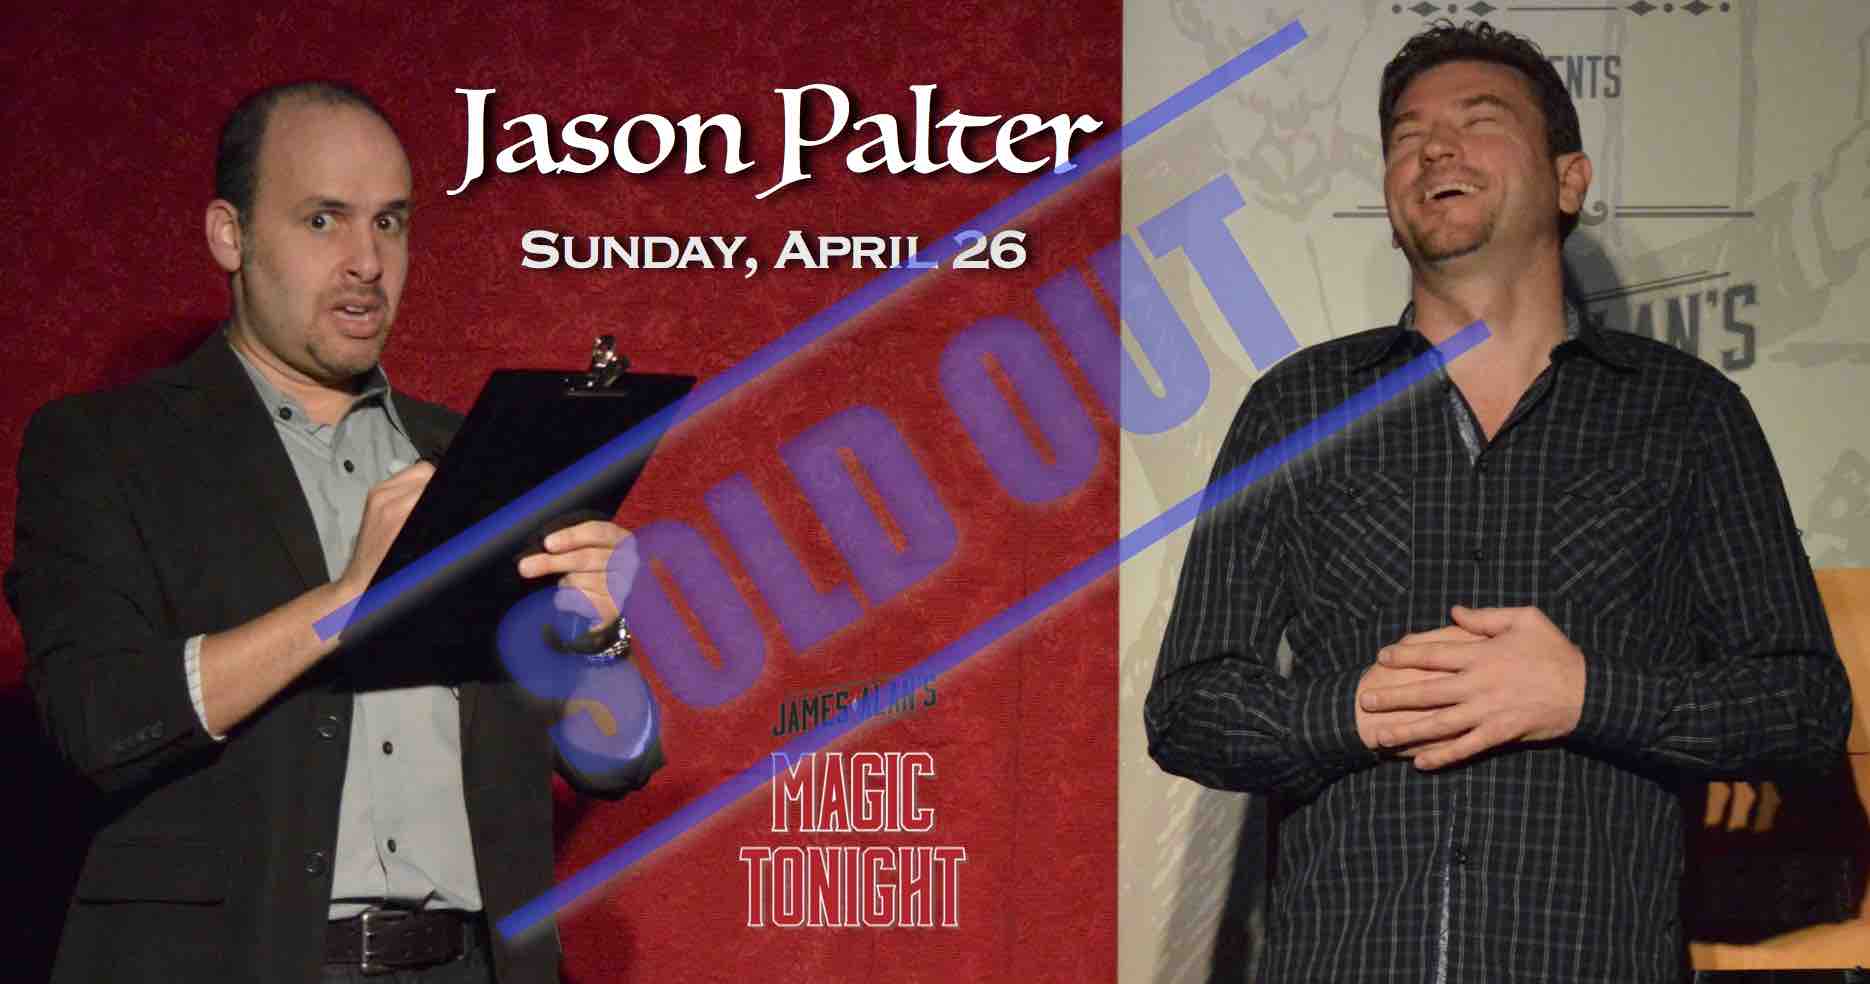 Apr 26 Jason Palter sold out